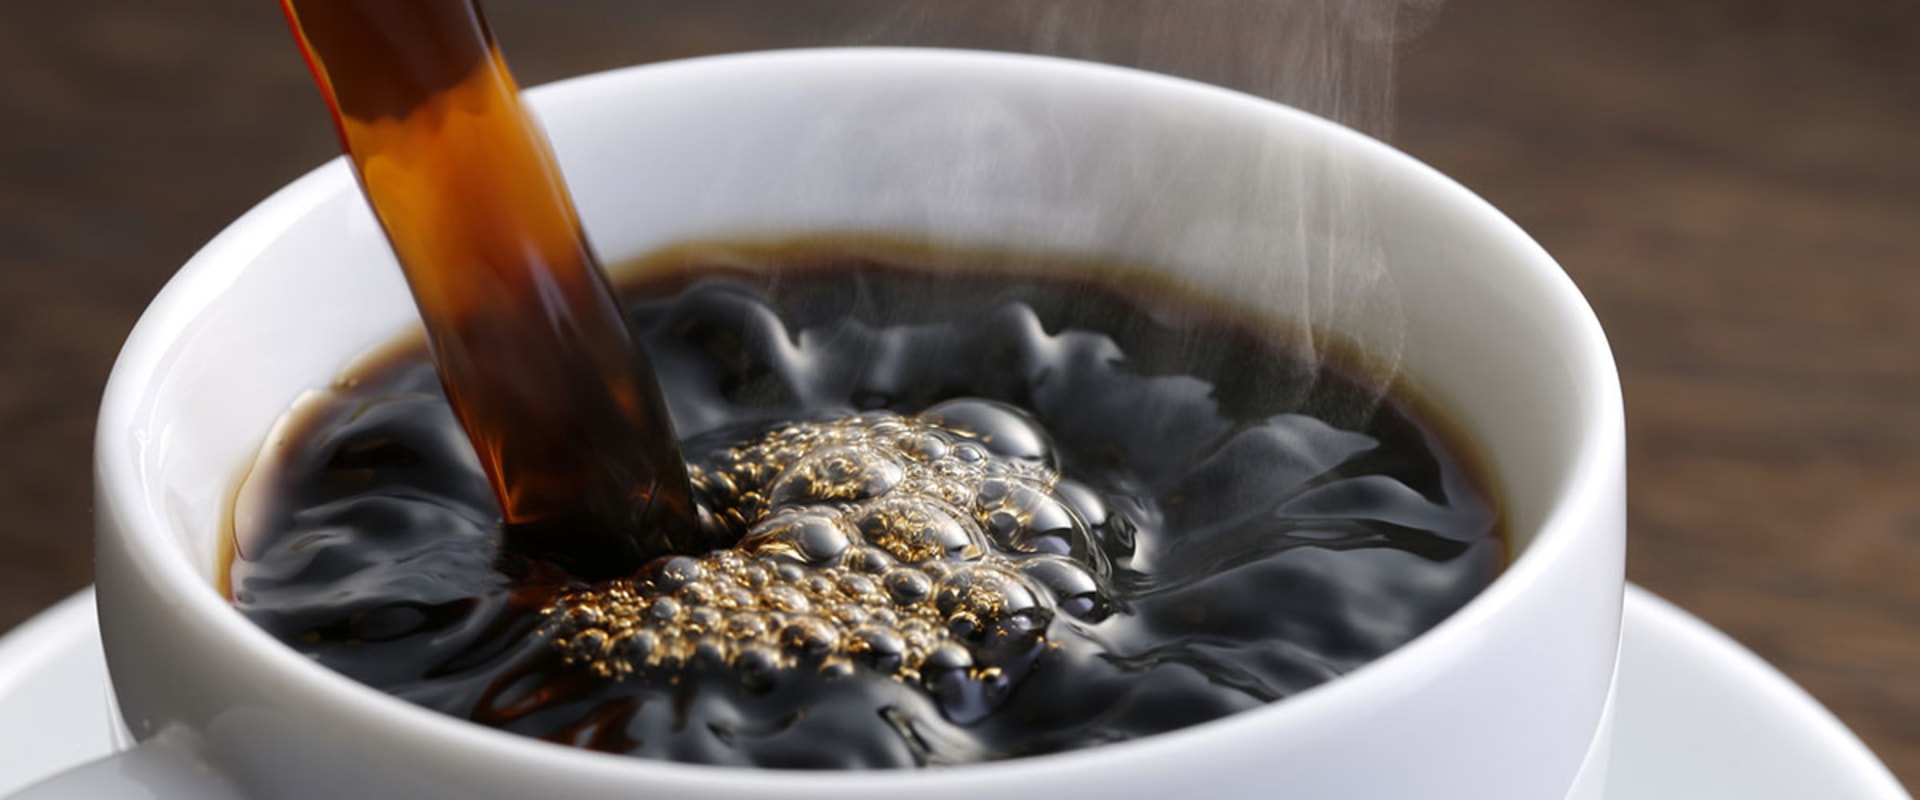 Is it Harmful to Drink Coffee Every Day?